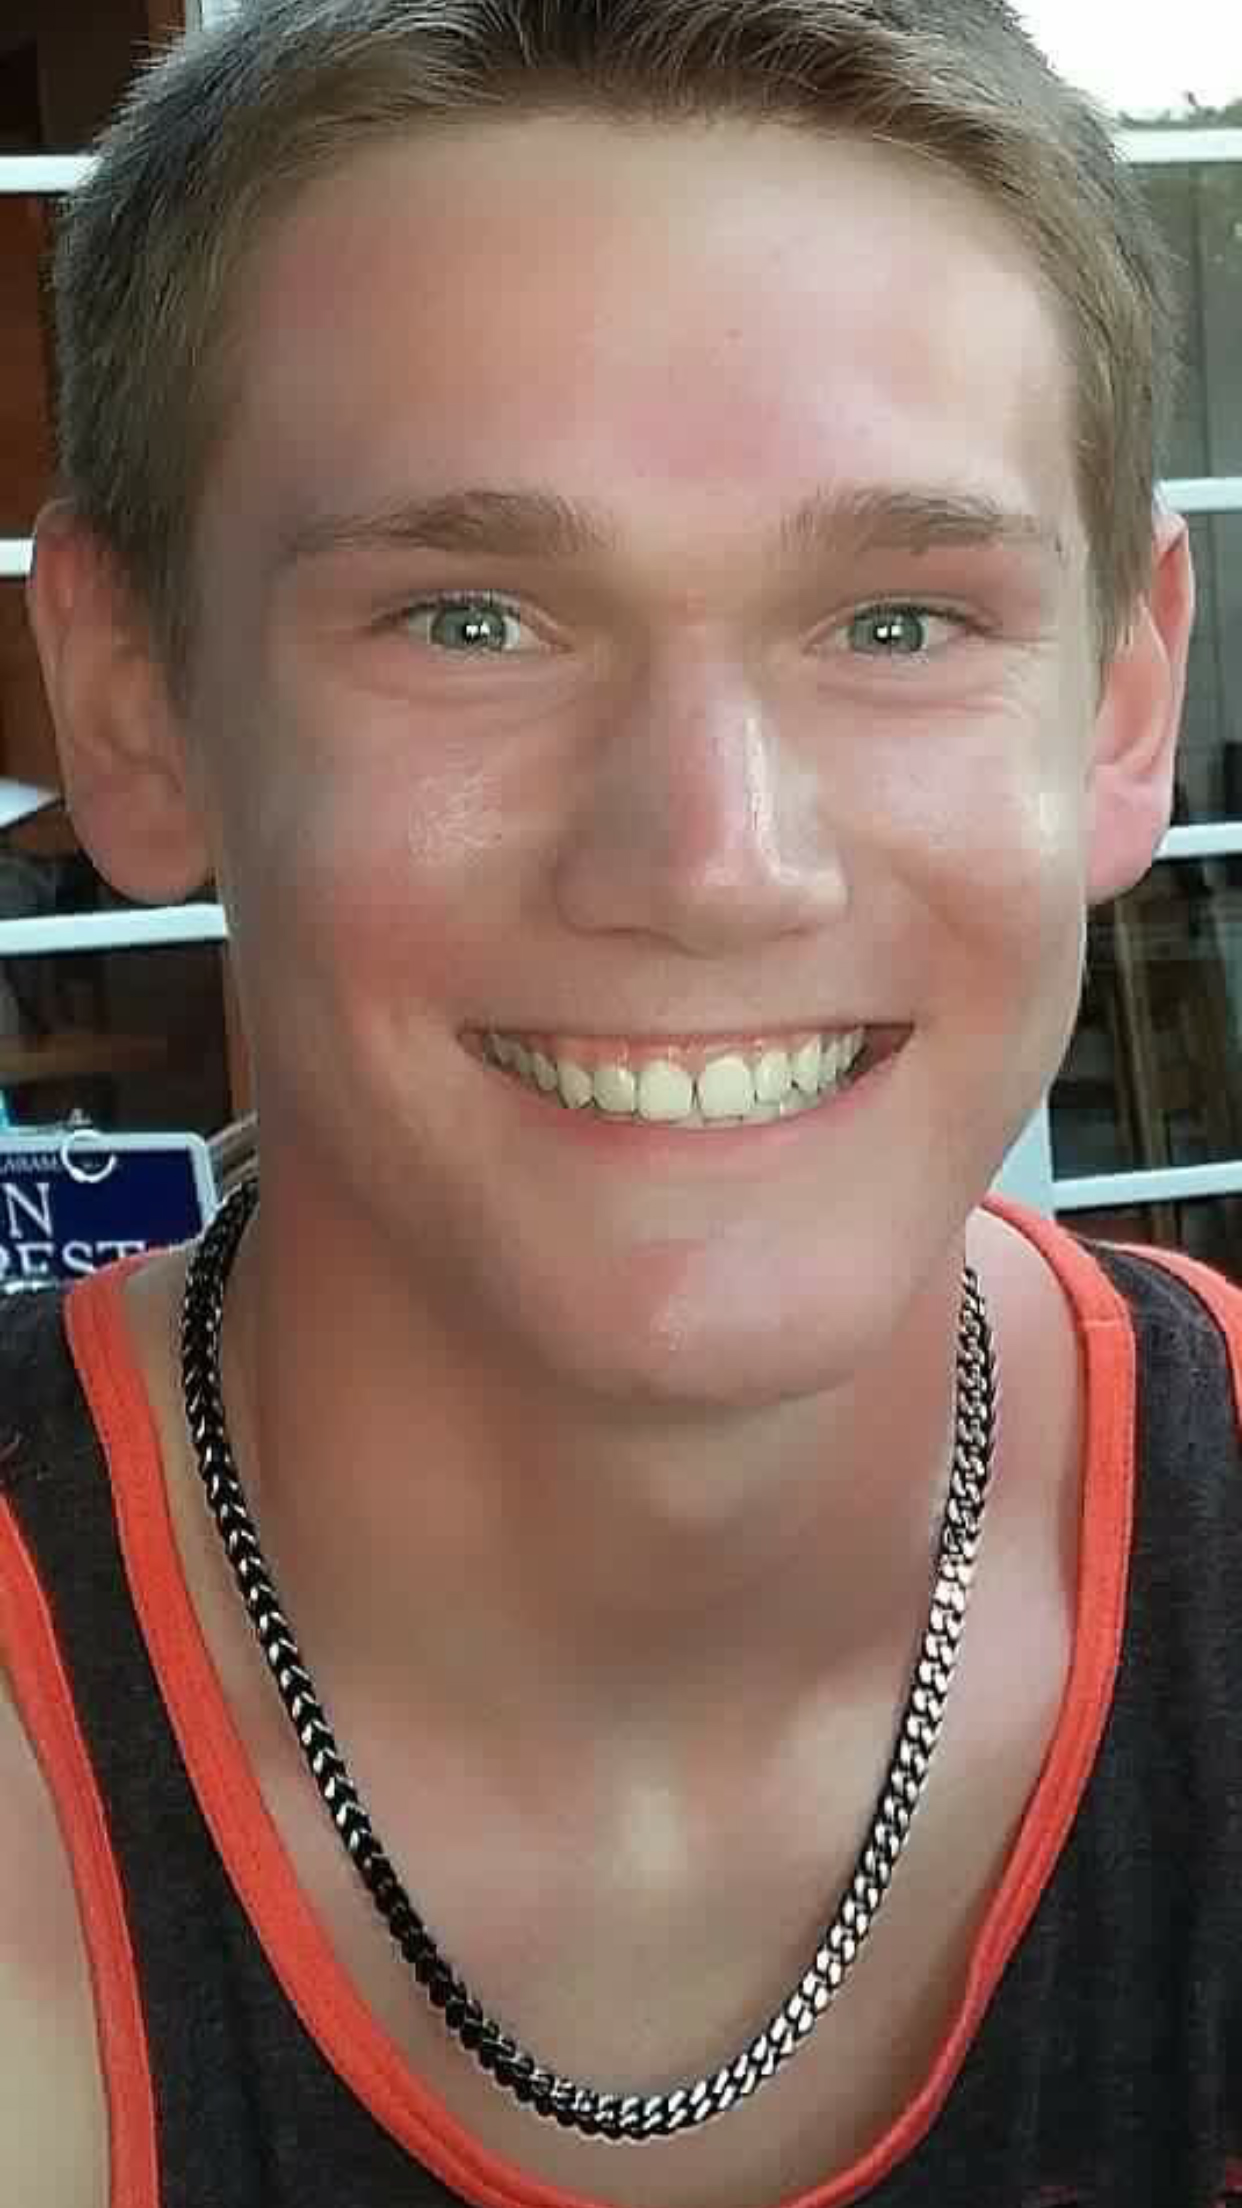 PHOTO: Tyler Smith was 17 when he and his father were killed by Jason Dalton at a Kalamazoo dealership.